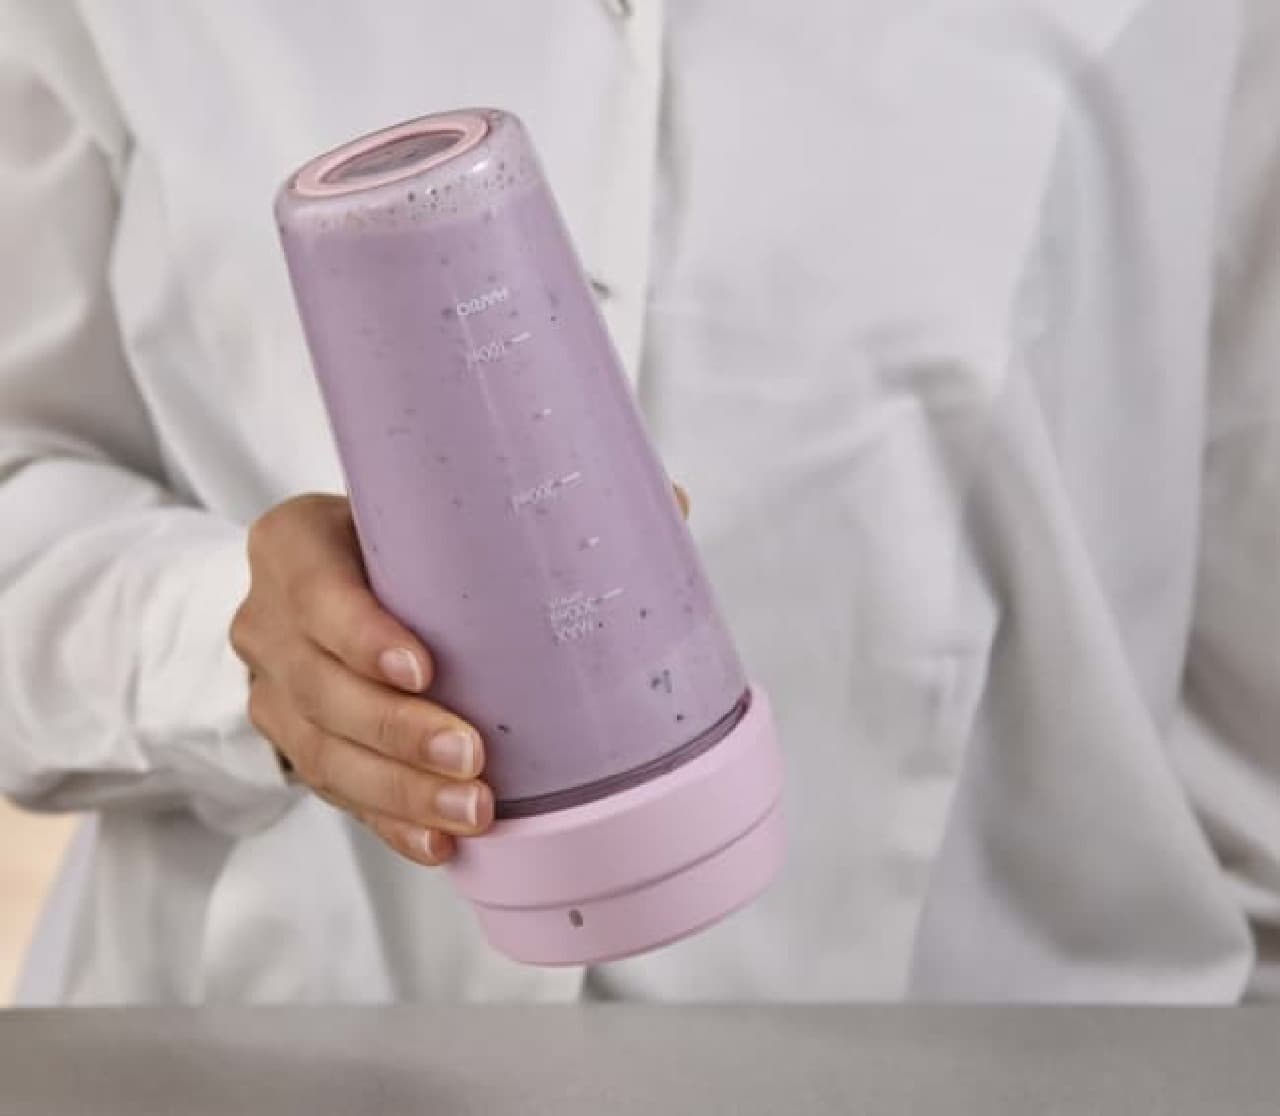 Easy & drink as it is ♪ HARIO "Electric Smoothie Maker"-USB rechargeable compact blender